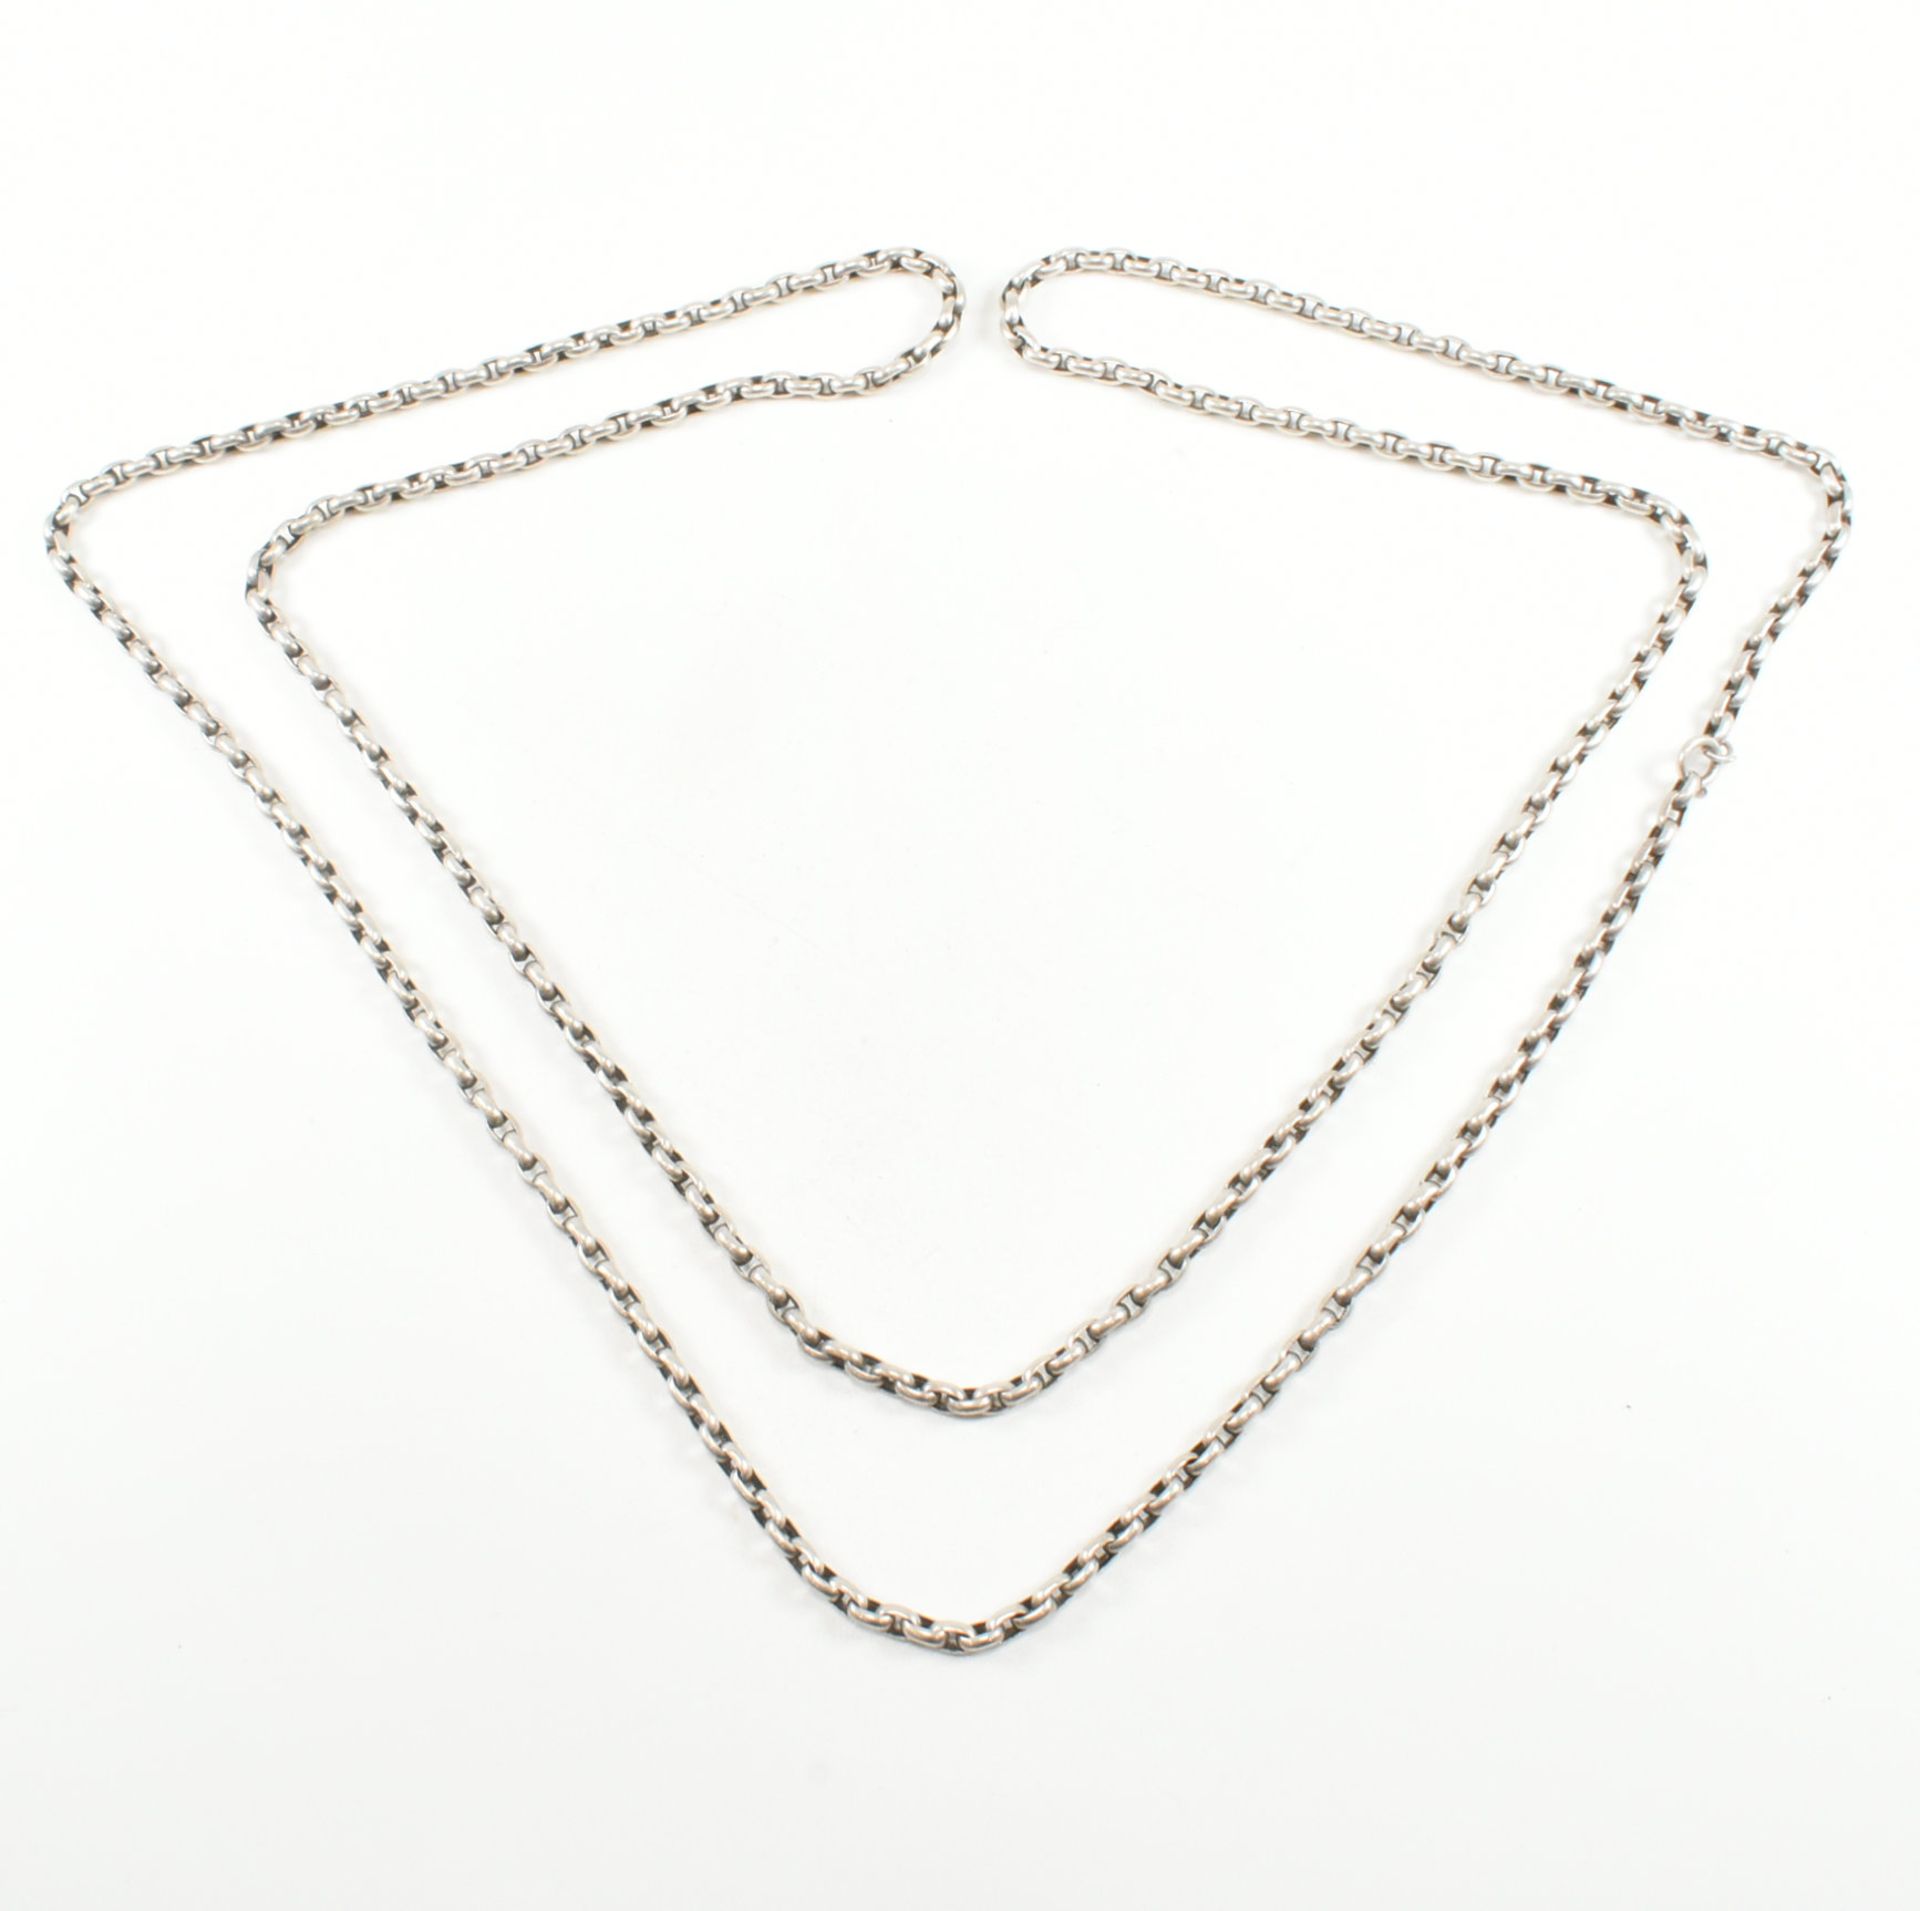 VINTAGE WHITE METAL NECKLACE CHAIN - Image 5 of 5